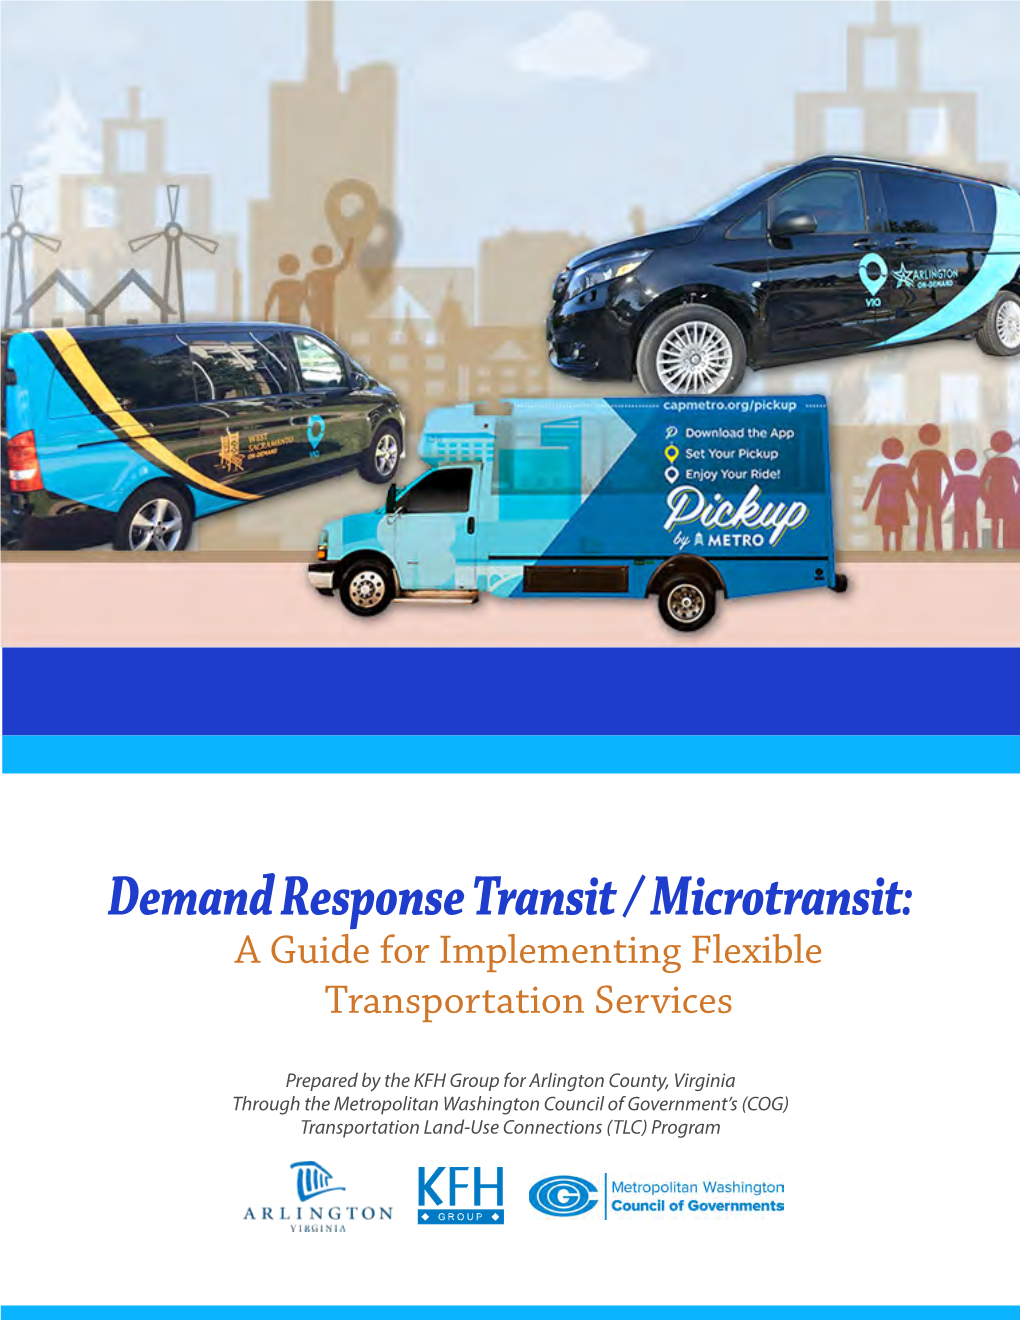 Demand Response Transit / Microtransit: a Guide for Implementing Flexible Transportation Services